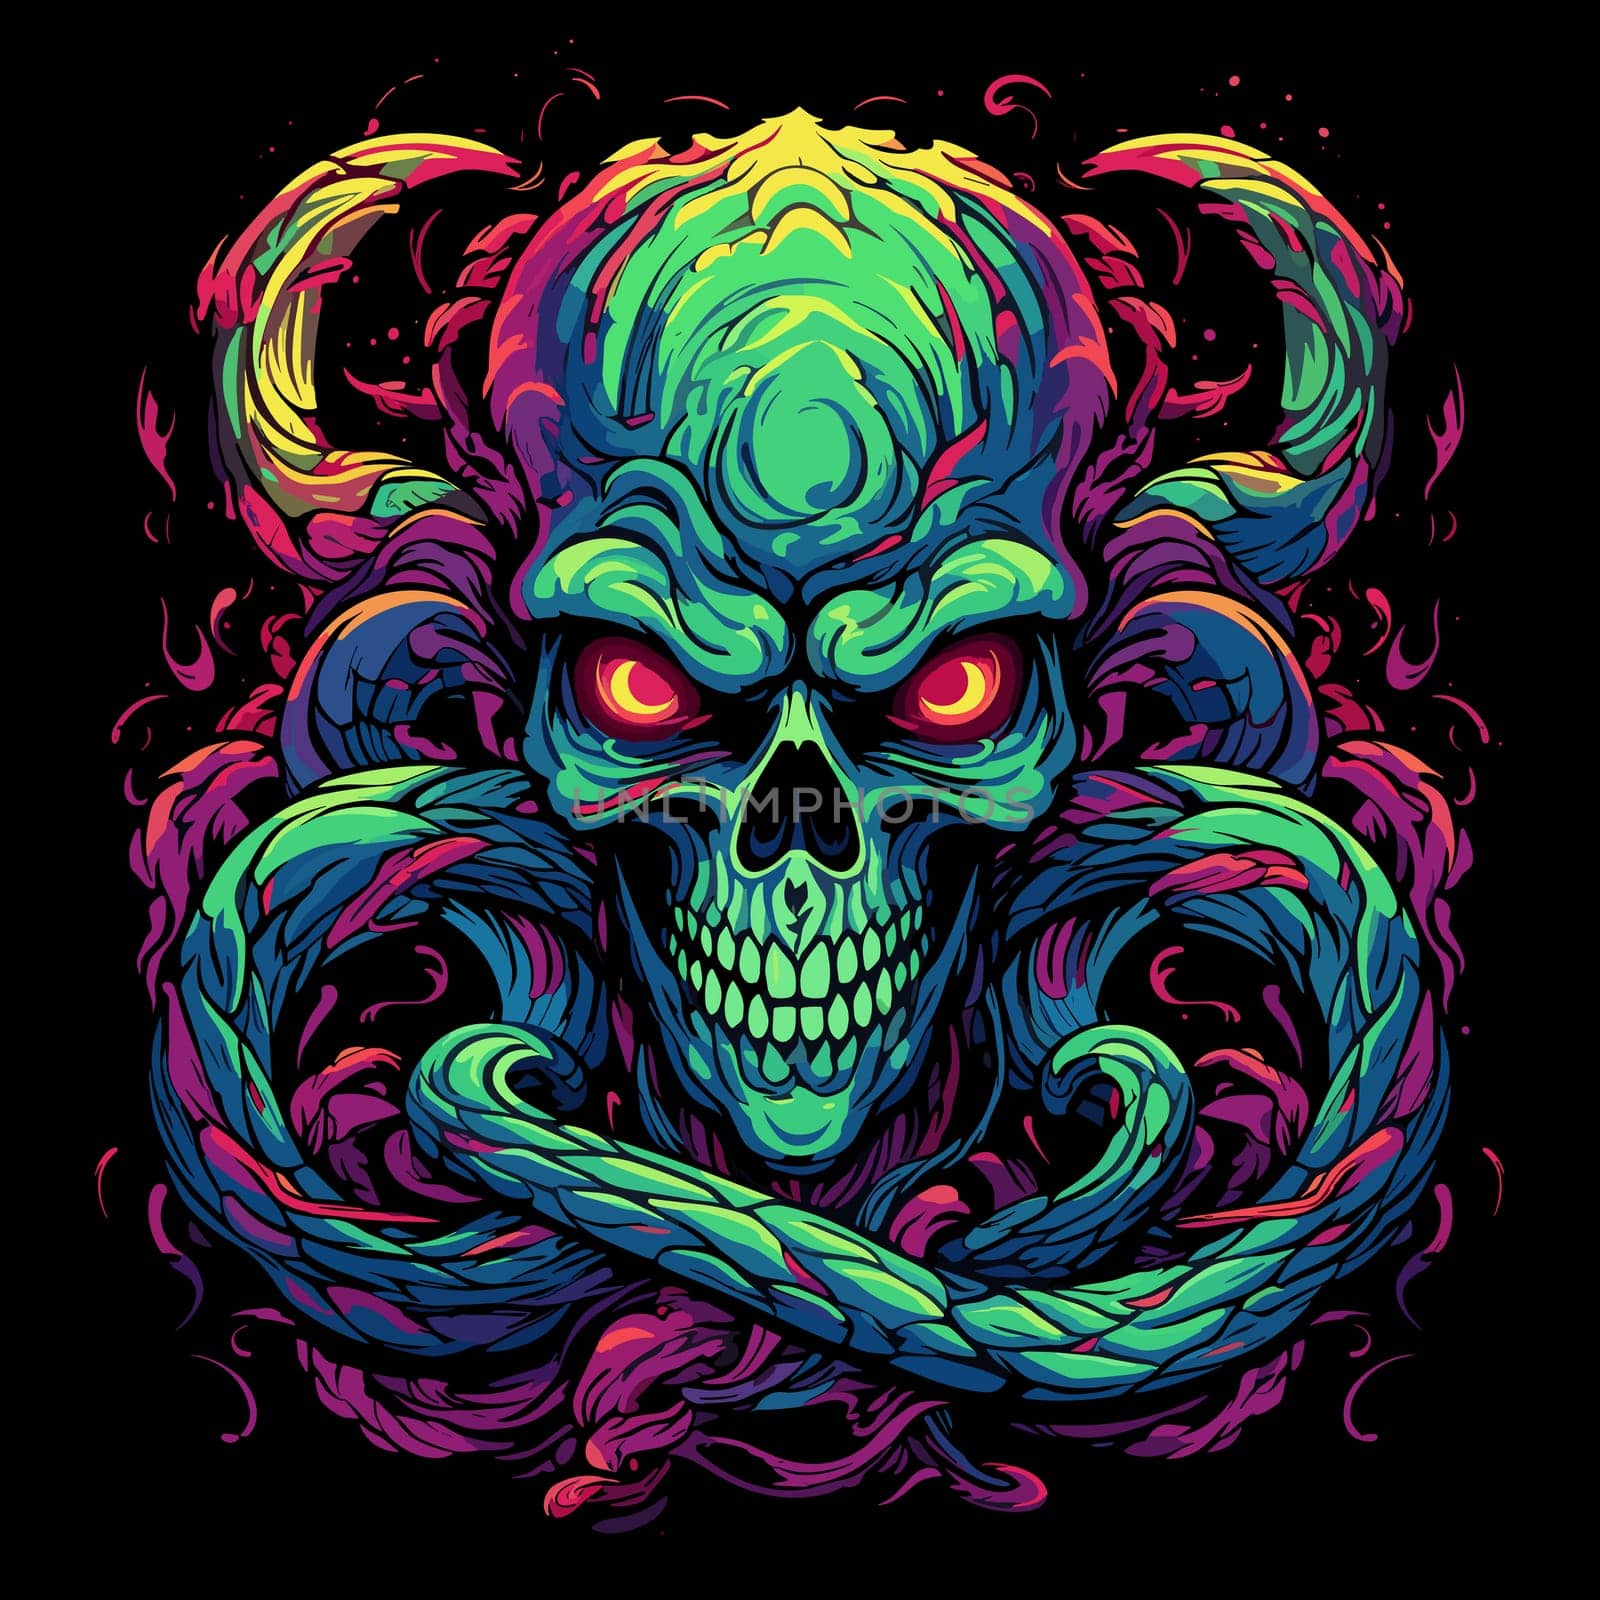 A devil's skull with a snake. Mystical illustration in vector pop art style. Template for t-shirt print, sticker, poster, etc.